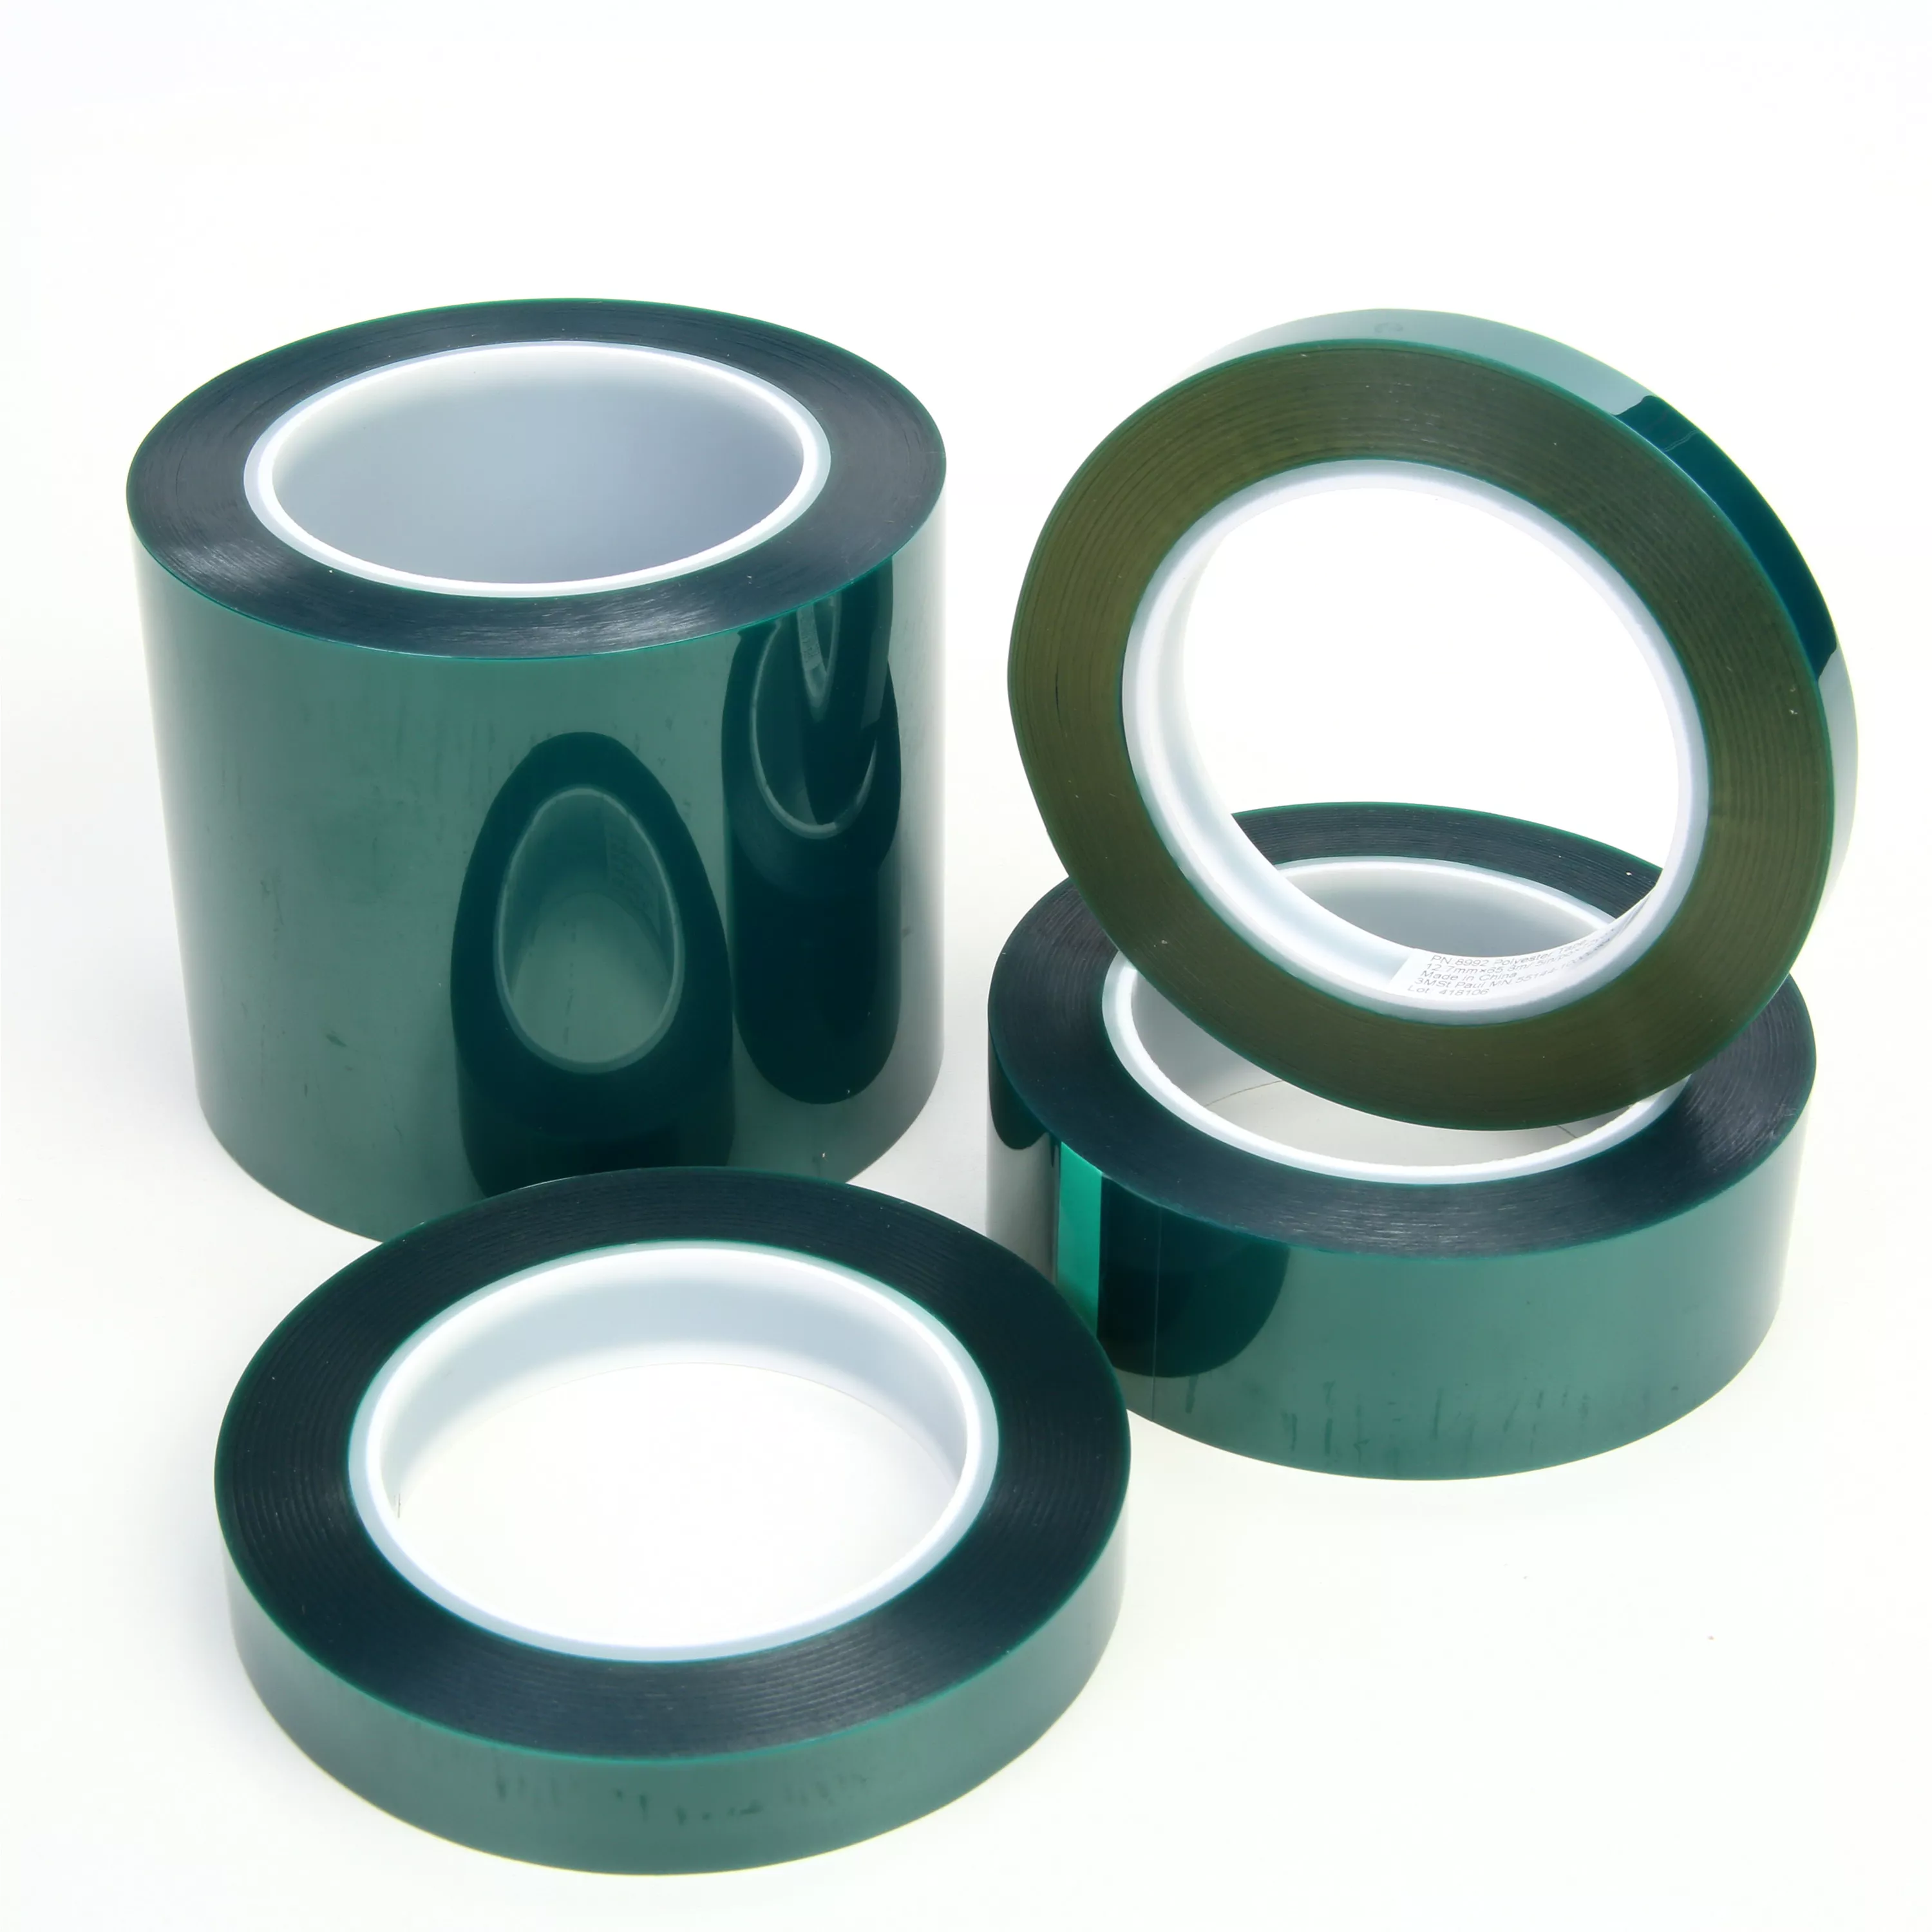 3M™ Polyester Tape 8992, Green, 2 1/2 in x 72 yd, 3.2 mil, 12 Roll/Case